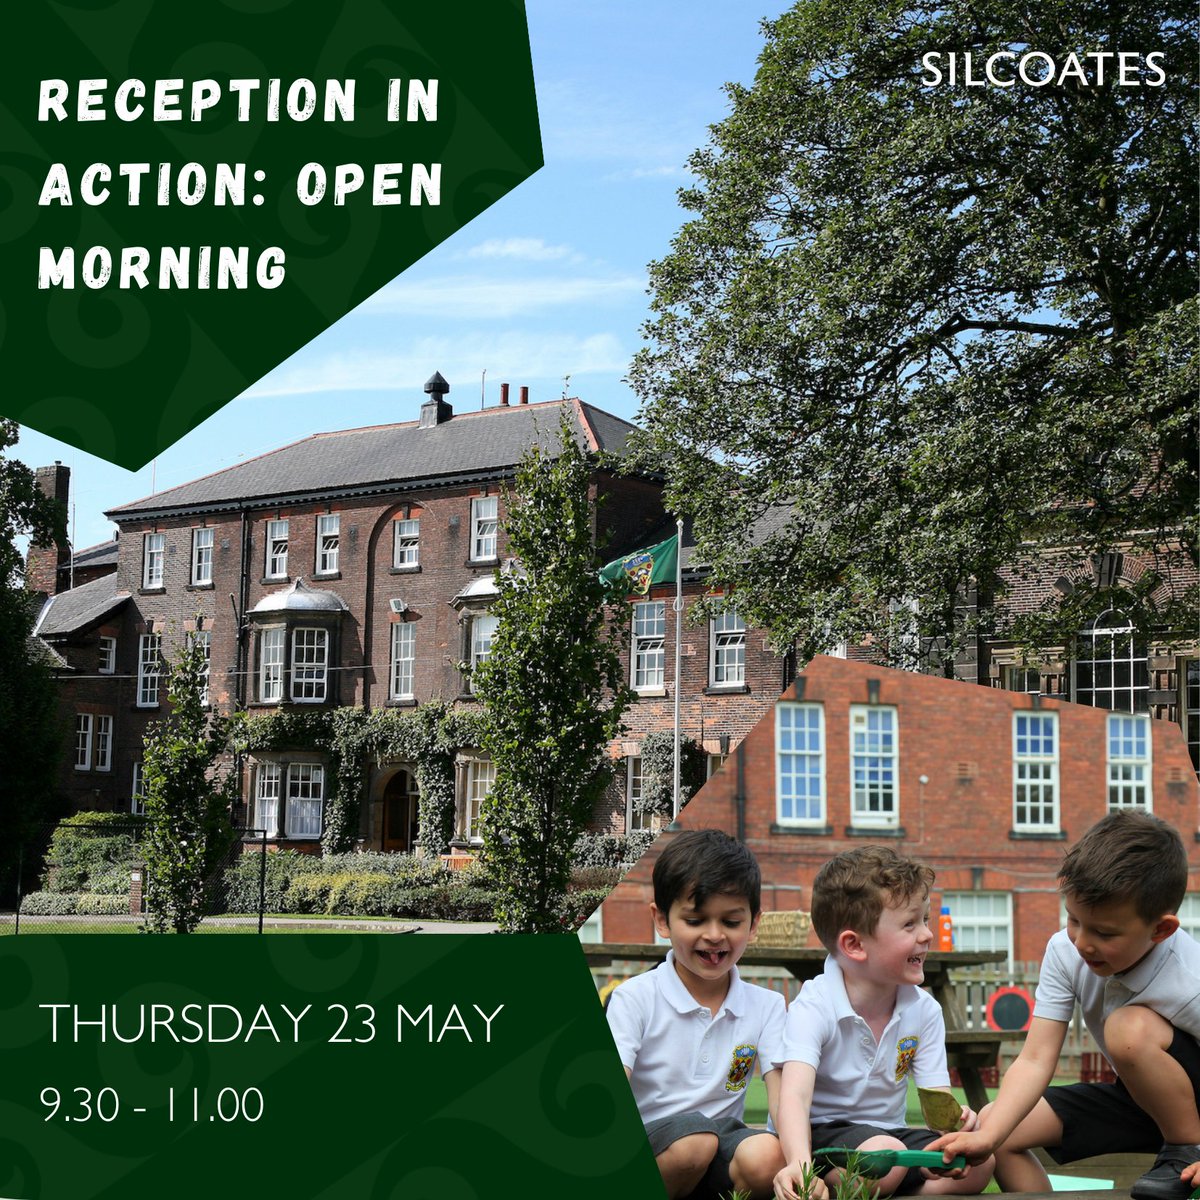 Is your child starting school this September? Are you still searching for the perfect educational fit? 

Join us for our Reception in Action: Open Morning.

Sign up here: silcoates.org.uk/join-us/open-e…

#JuniorSchool #StartingSchool #OpenEvent #IndependentSchool